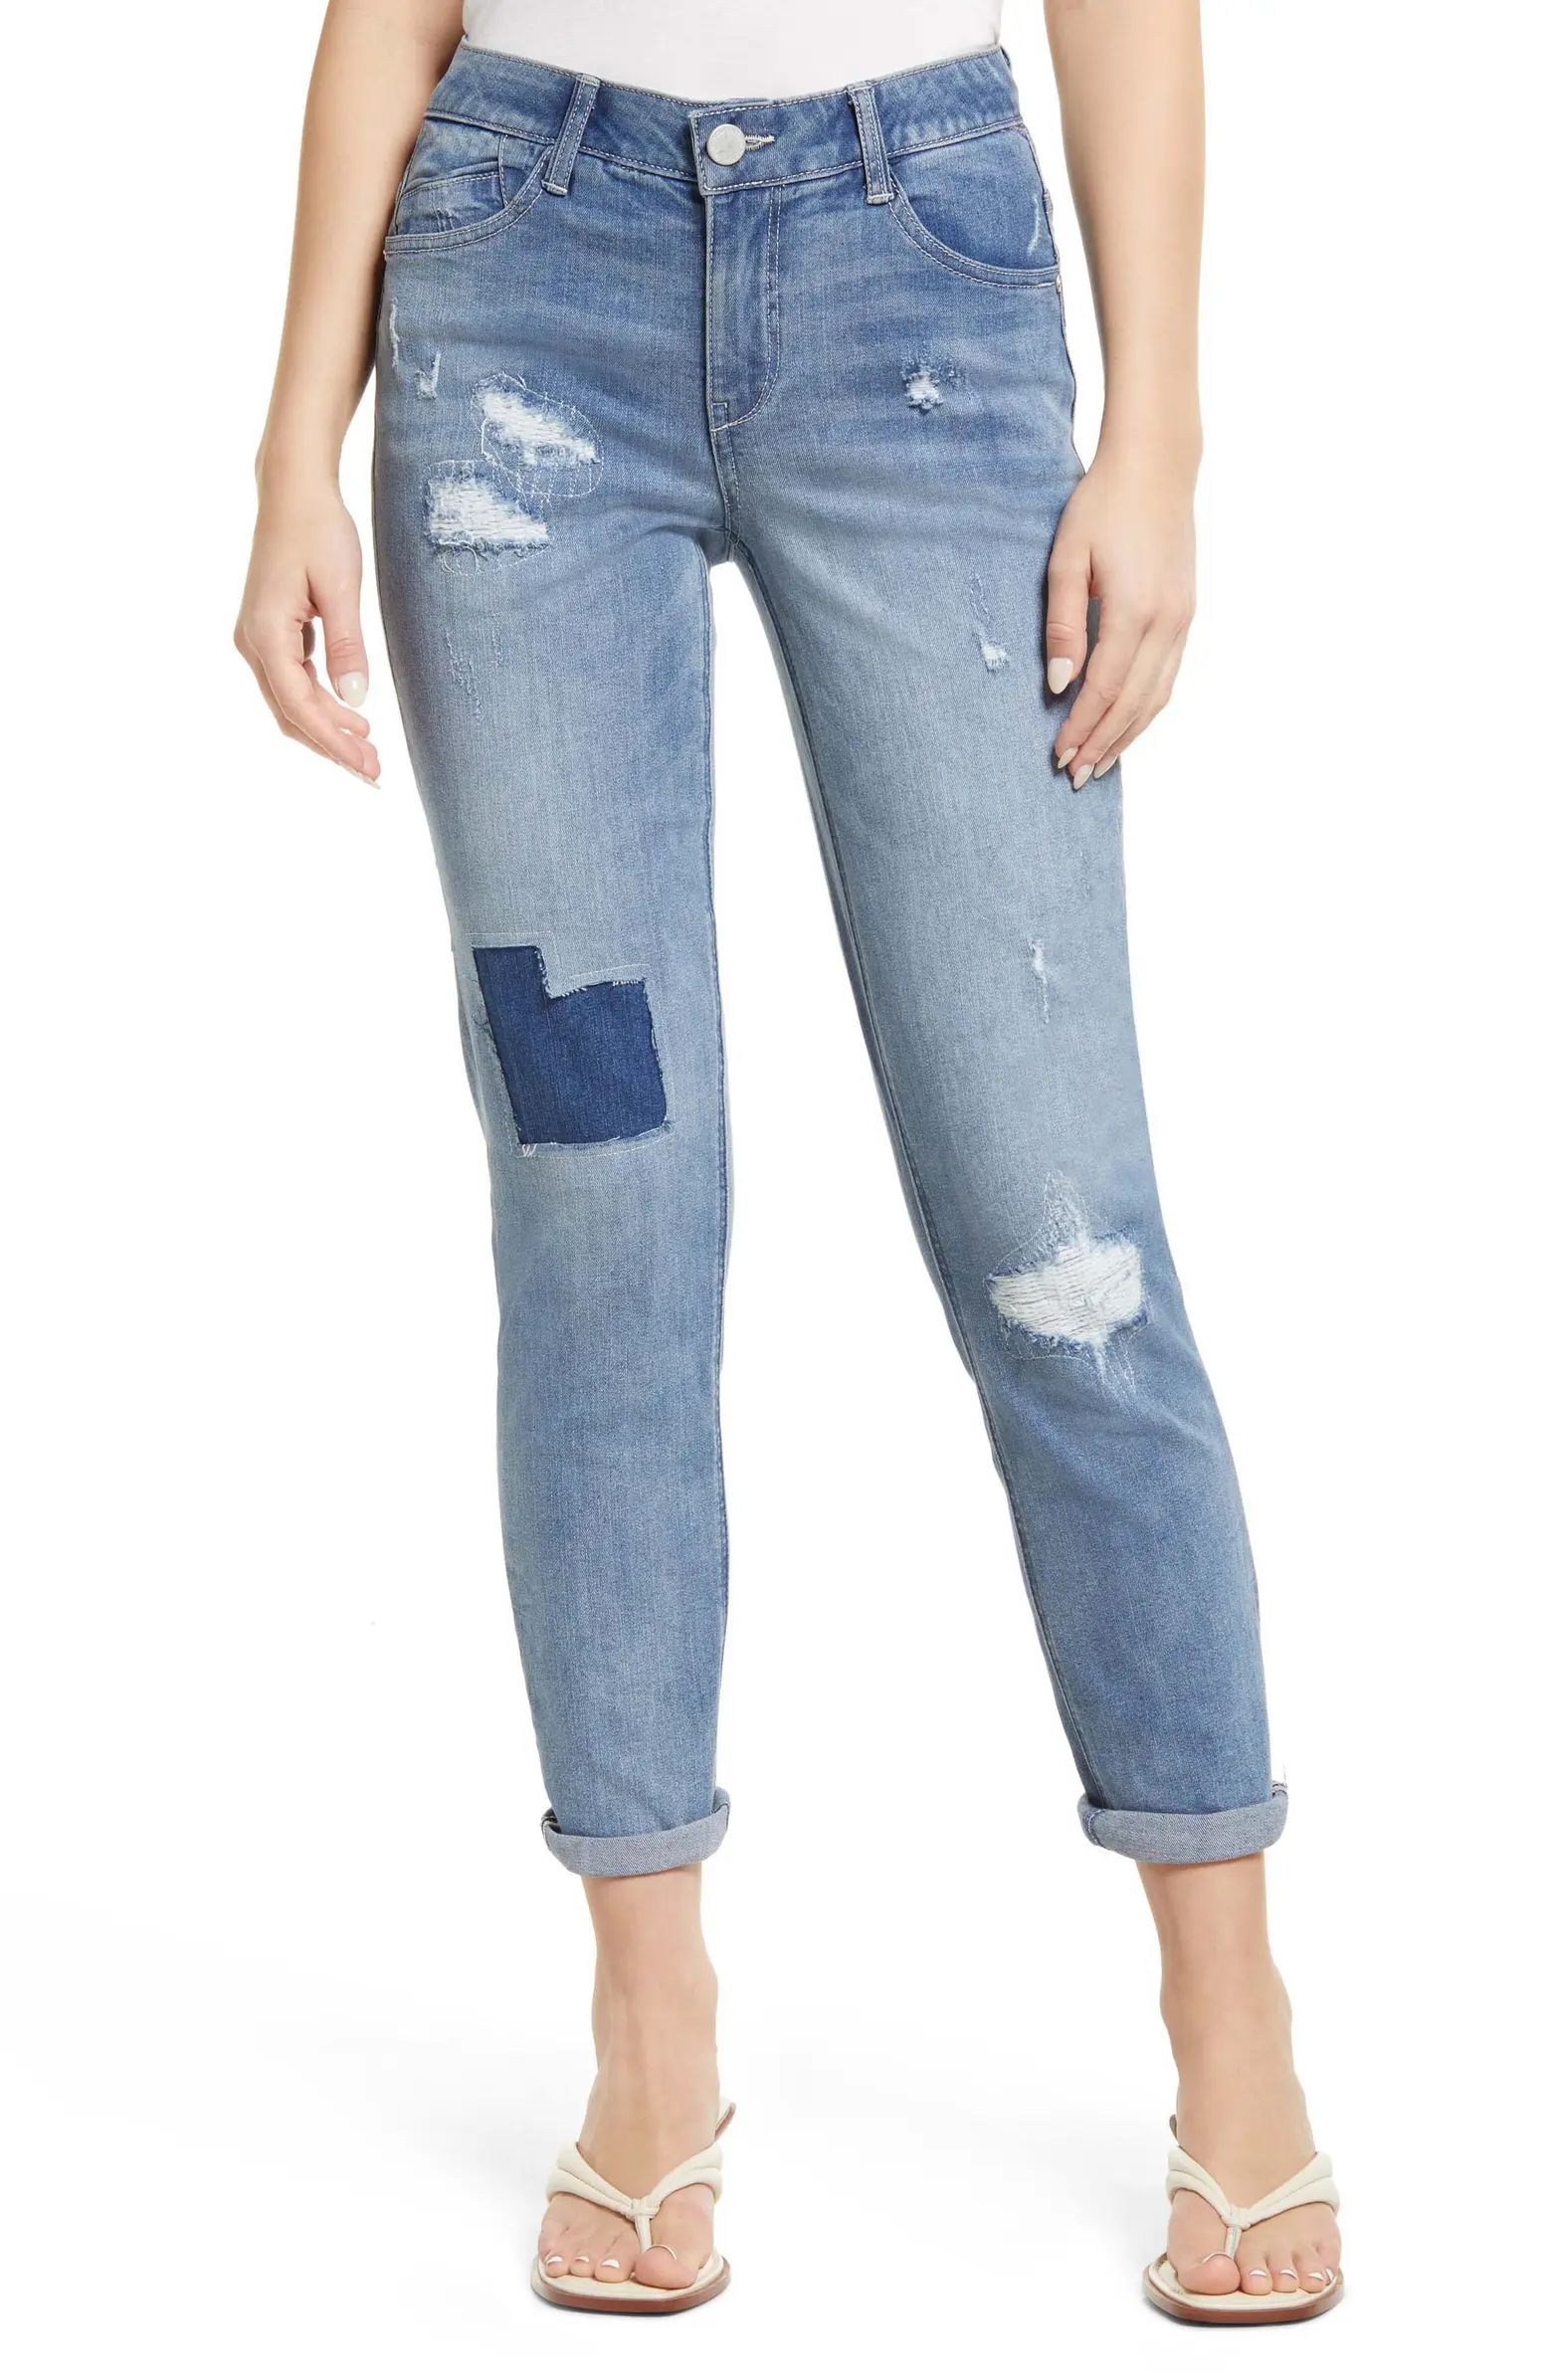 'Ab'Solution Girlfriend Jeans | Nordstrom